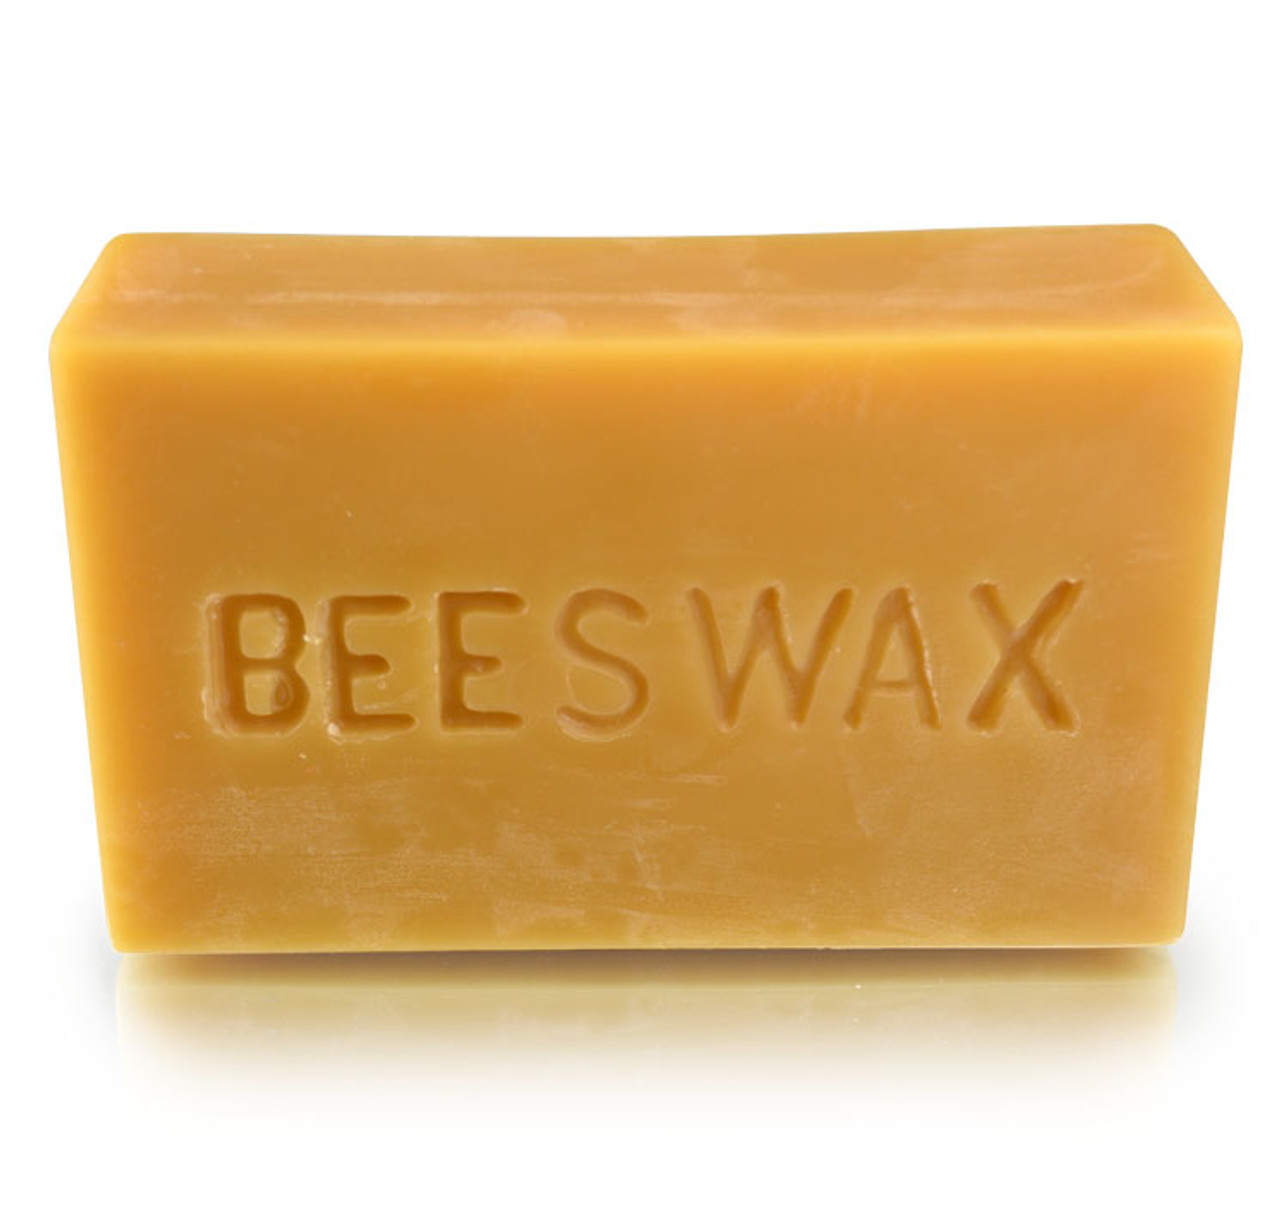 100% Beeswax One Pound Bar